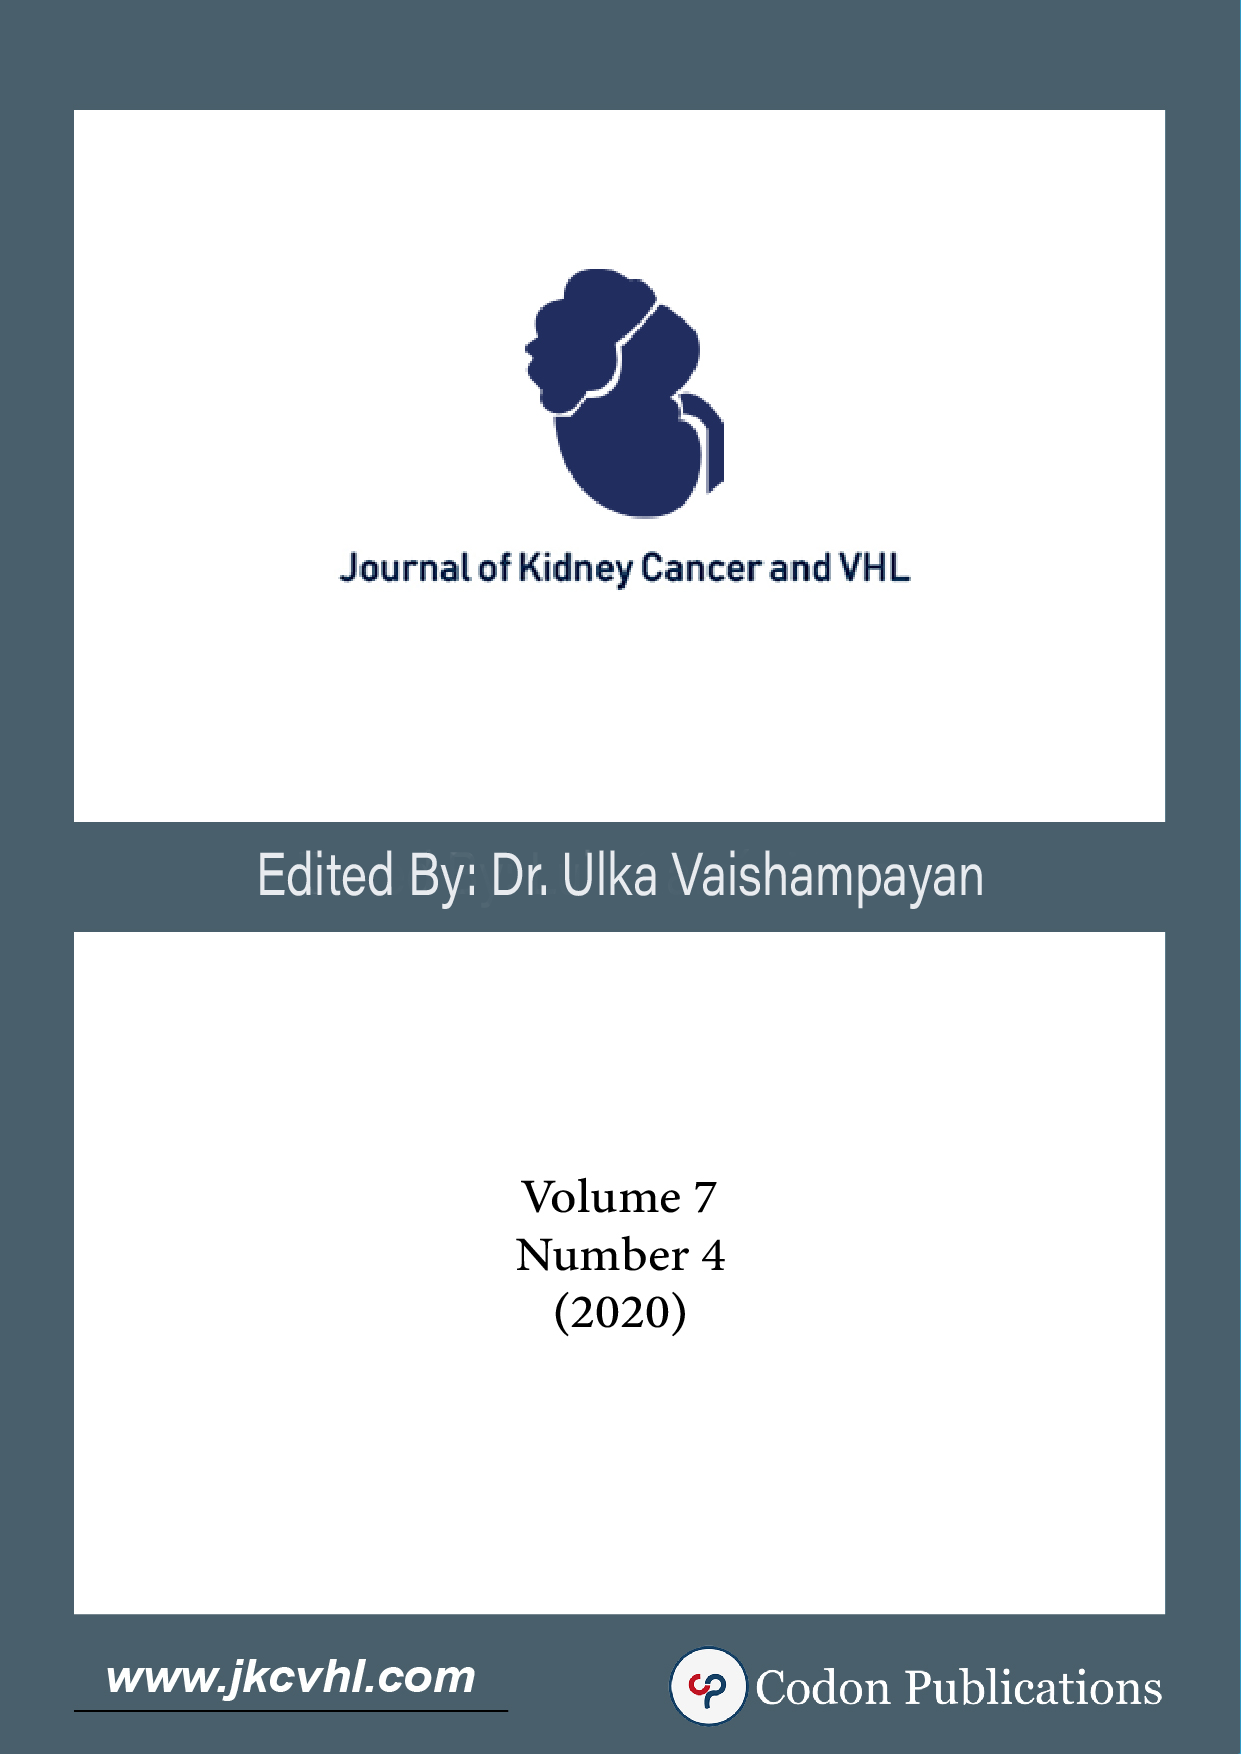 					View Vol. 7 No. 4 (2020): Journal of Kidney Cancer and VHL
				